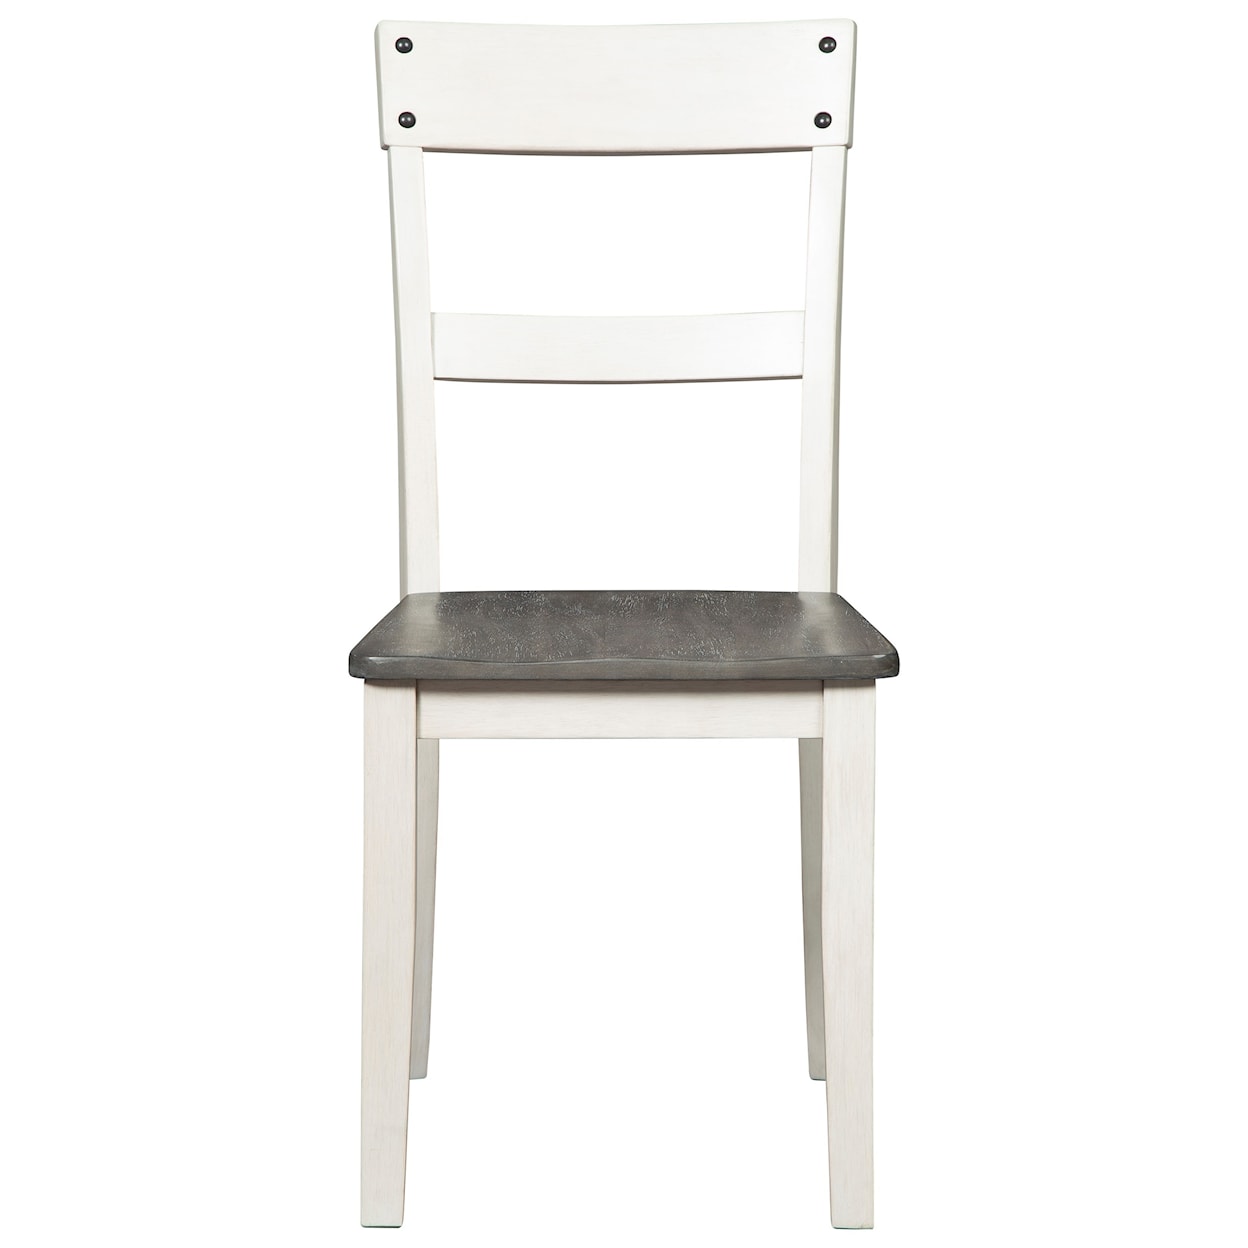 Signature Design Nelling Dining Room Side Chair